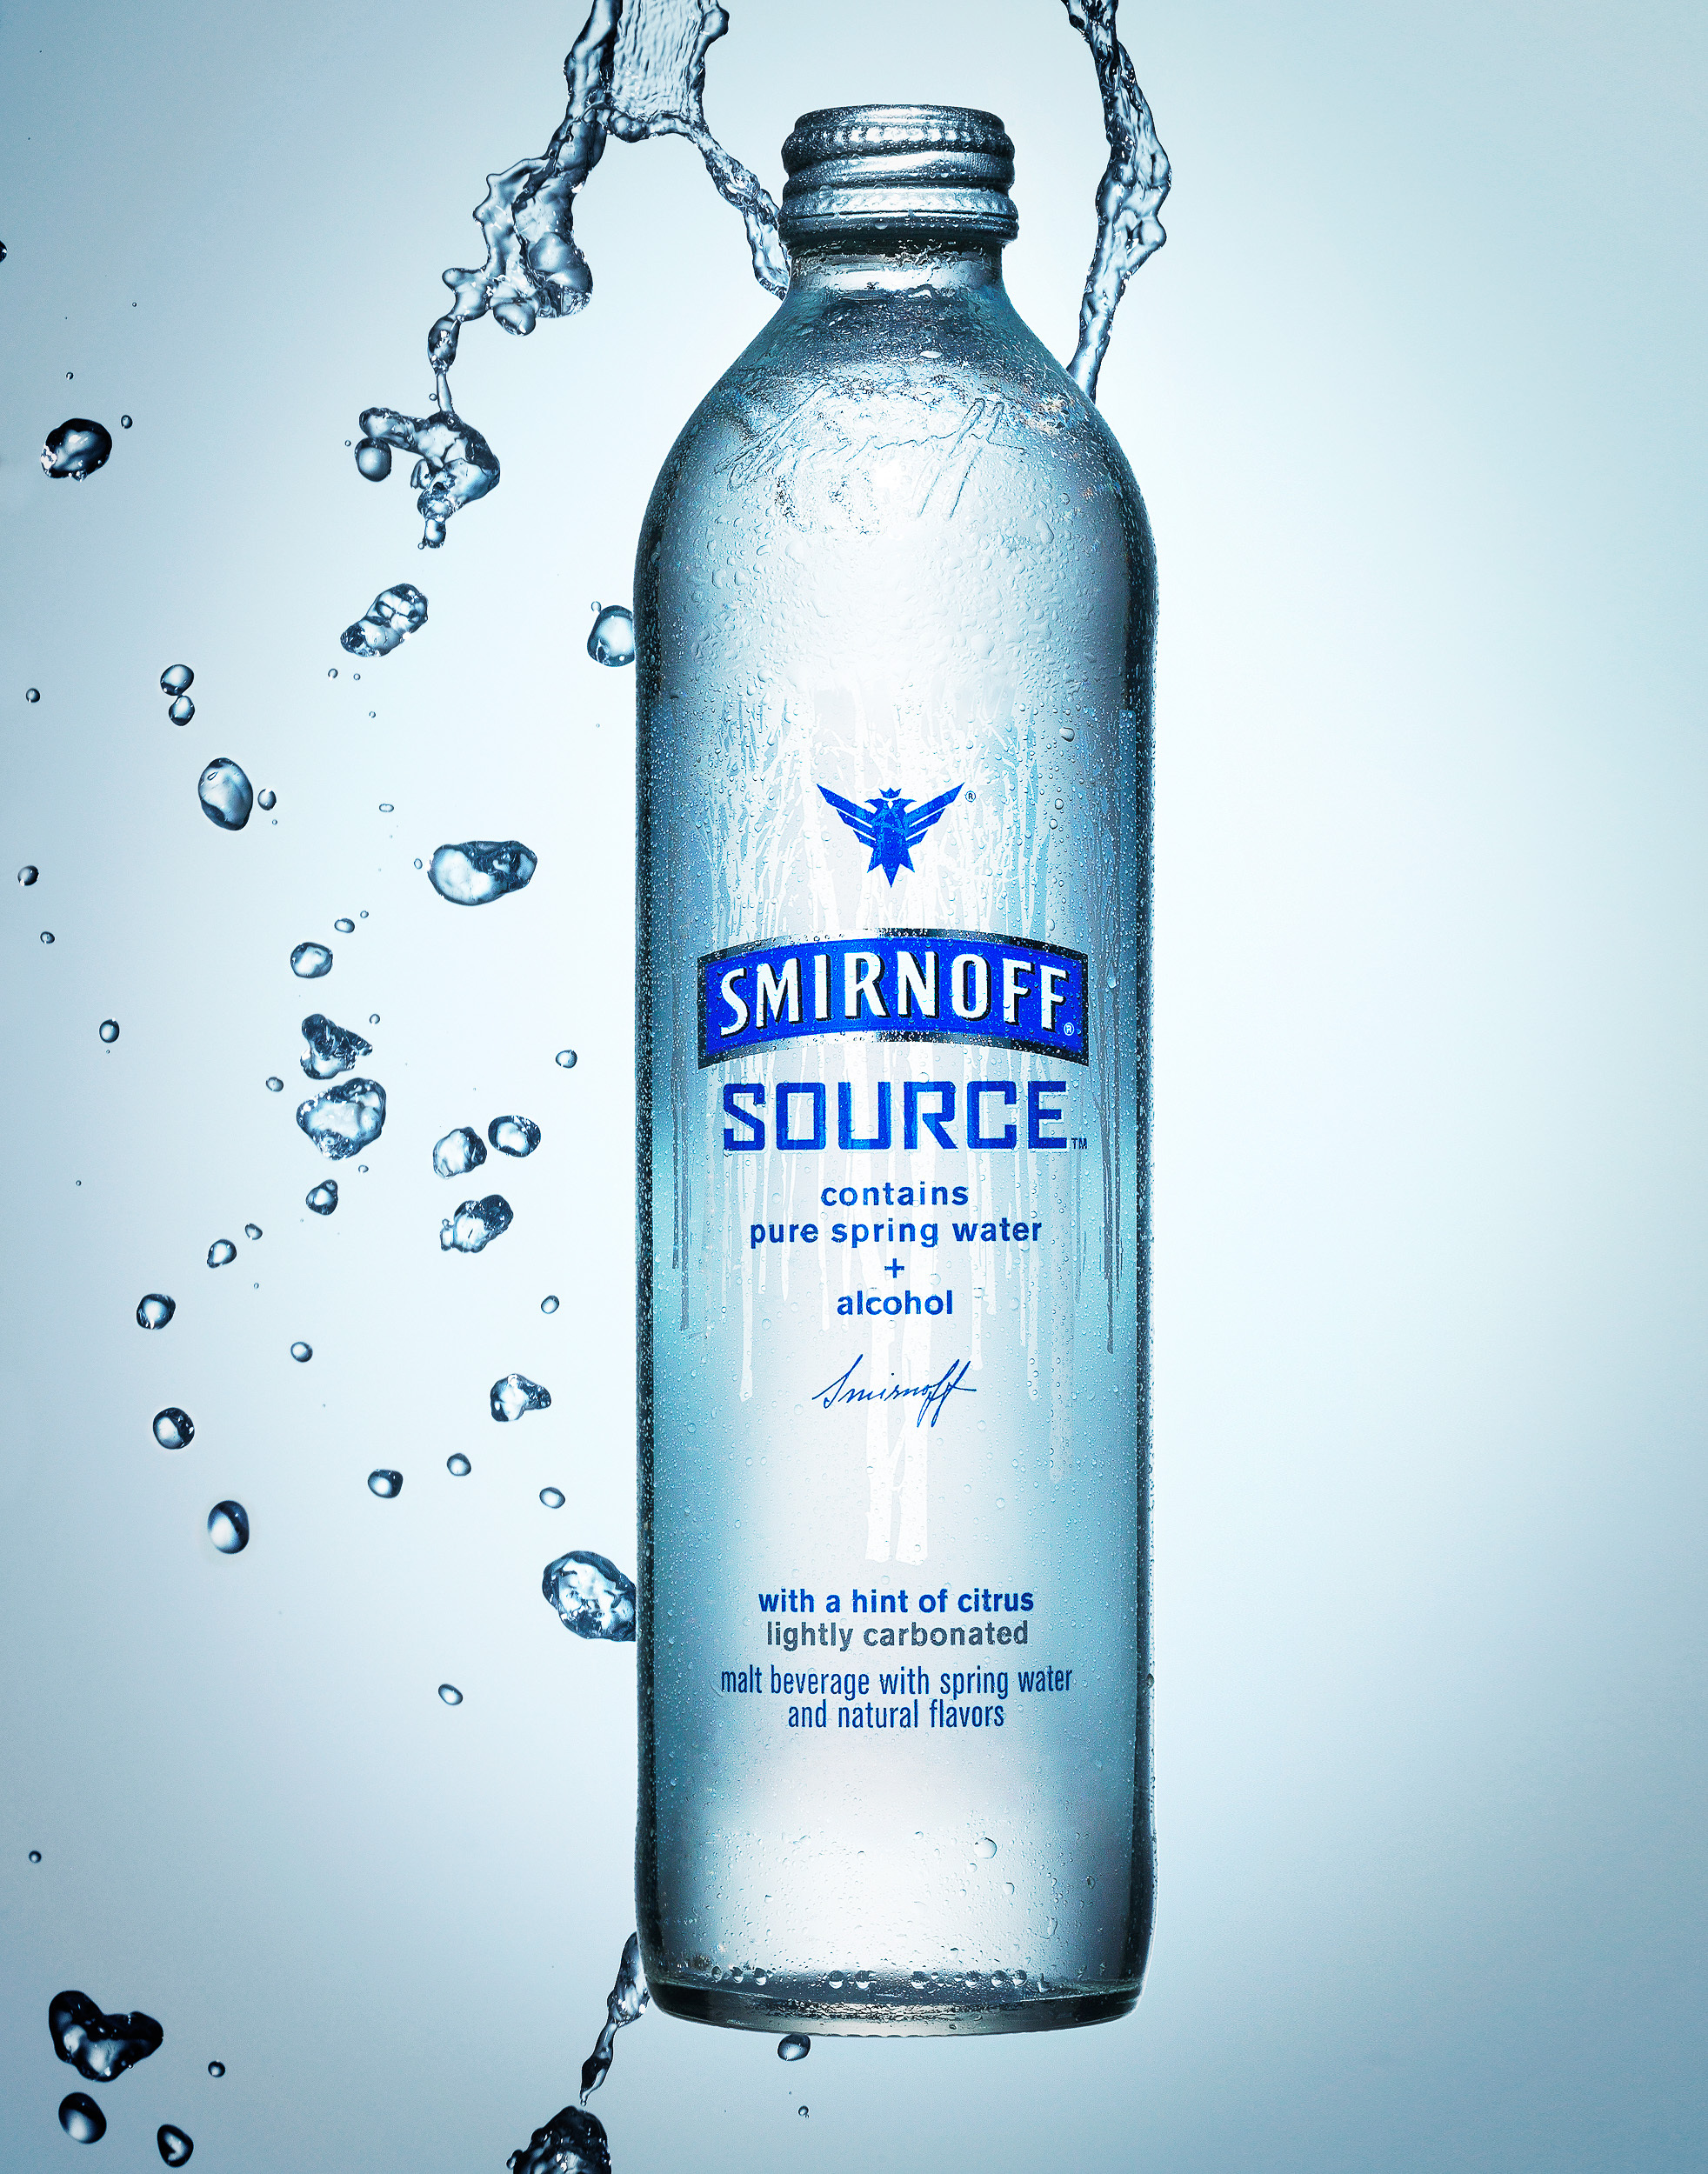 Smirnoff source by beverage and liquids photographer Timothy Hogan in Los Angeles